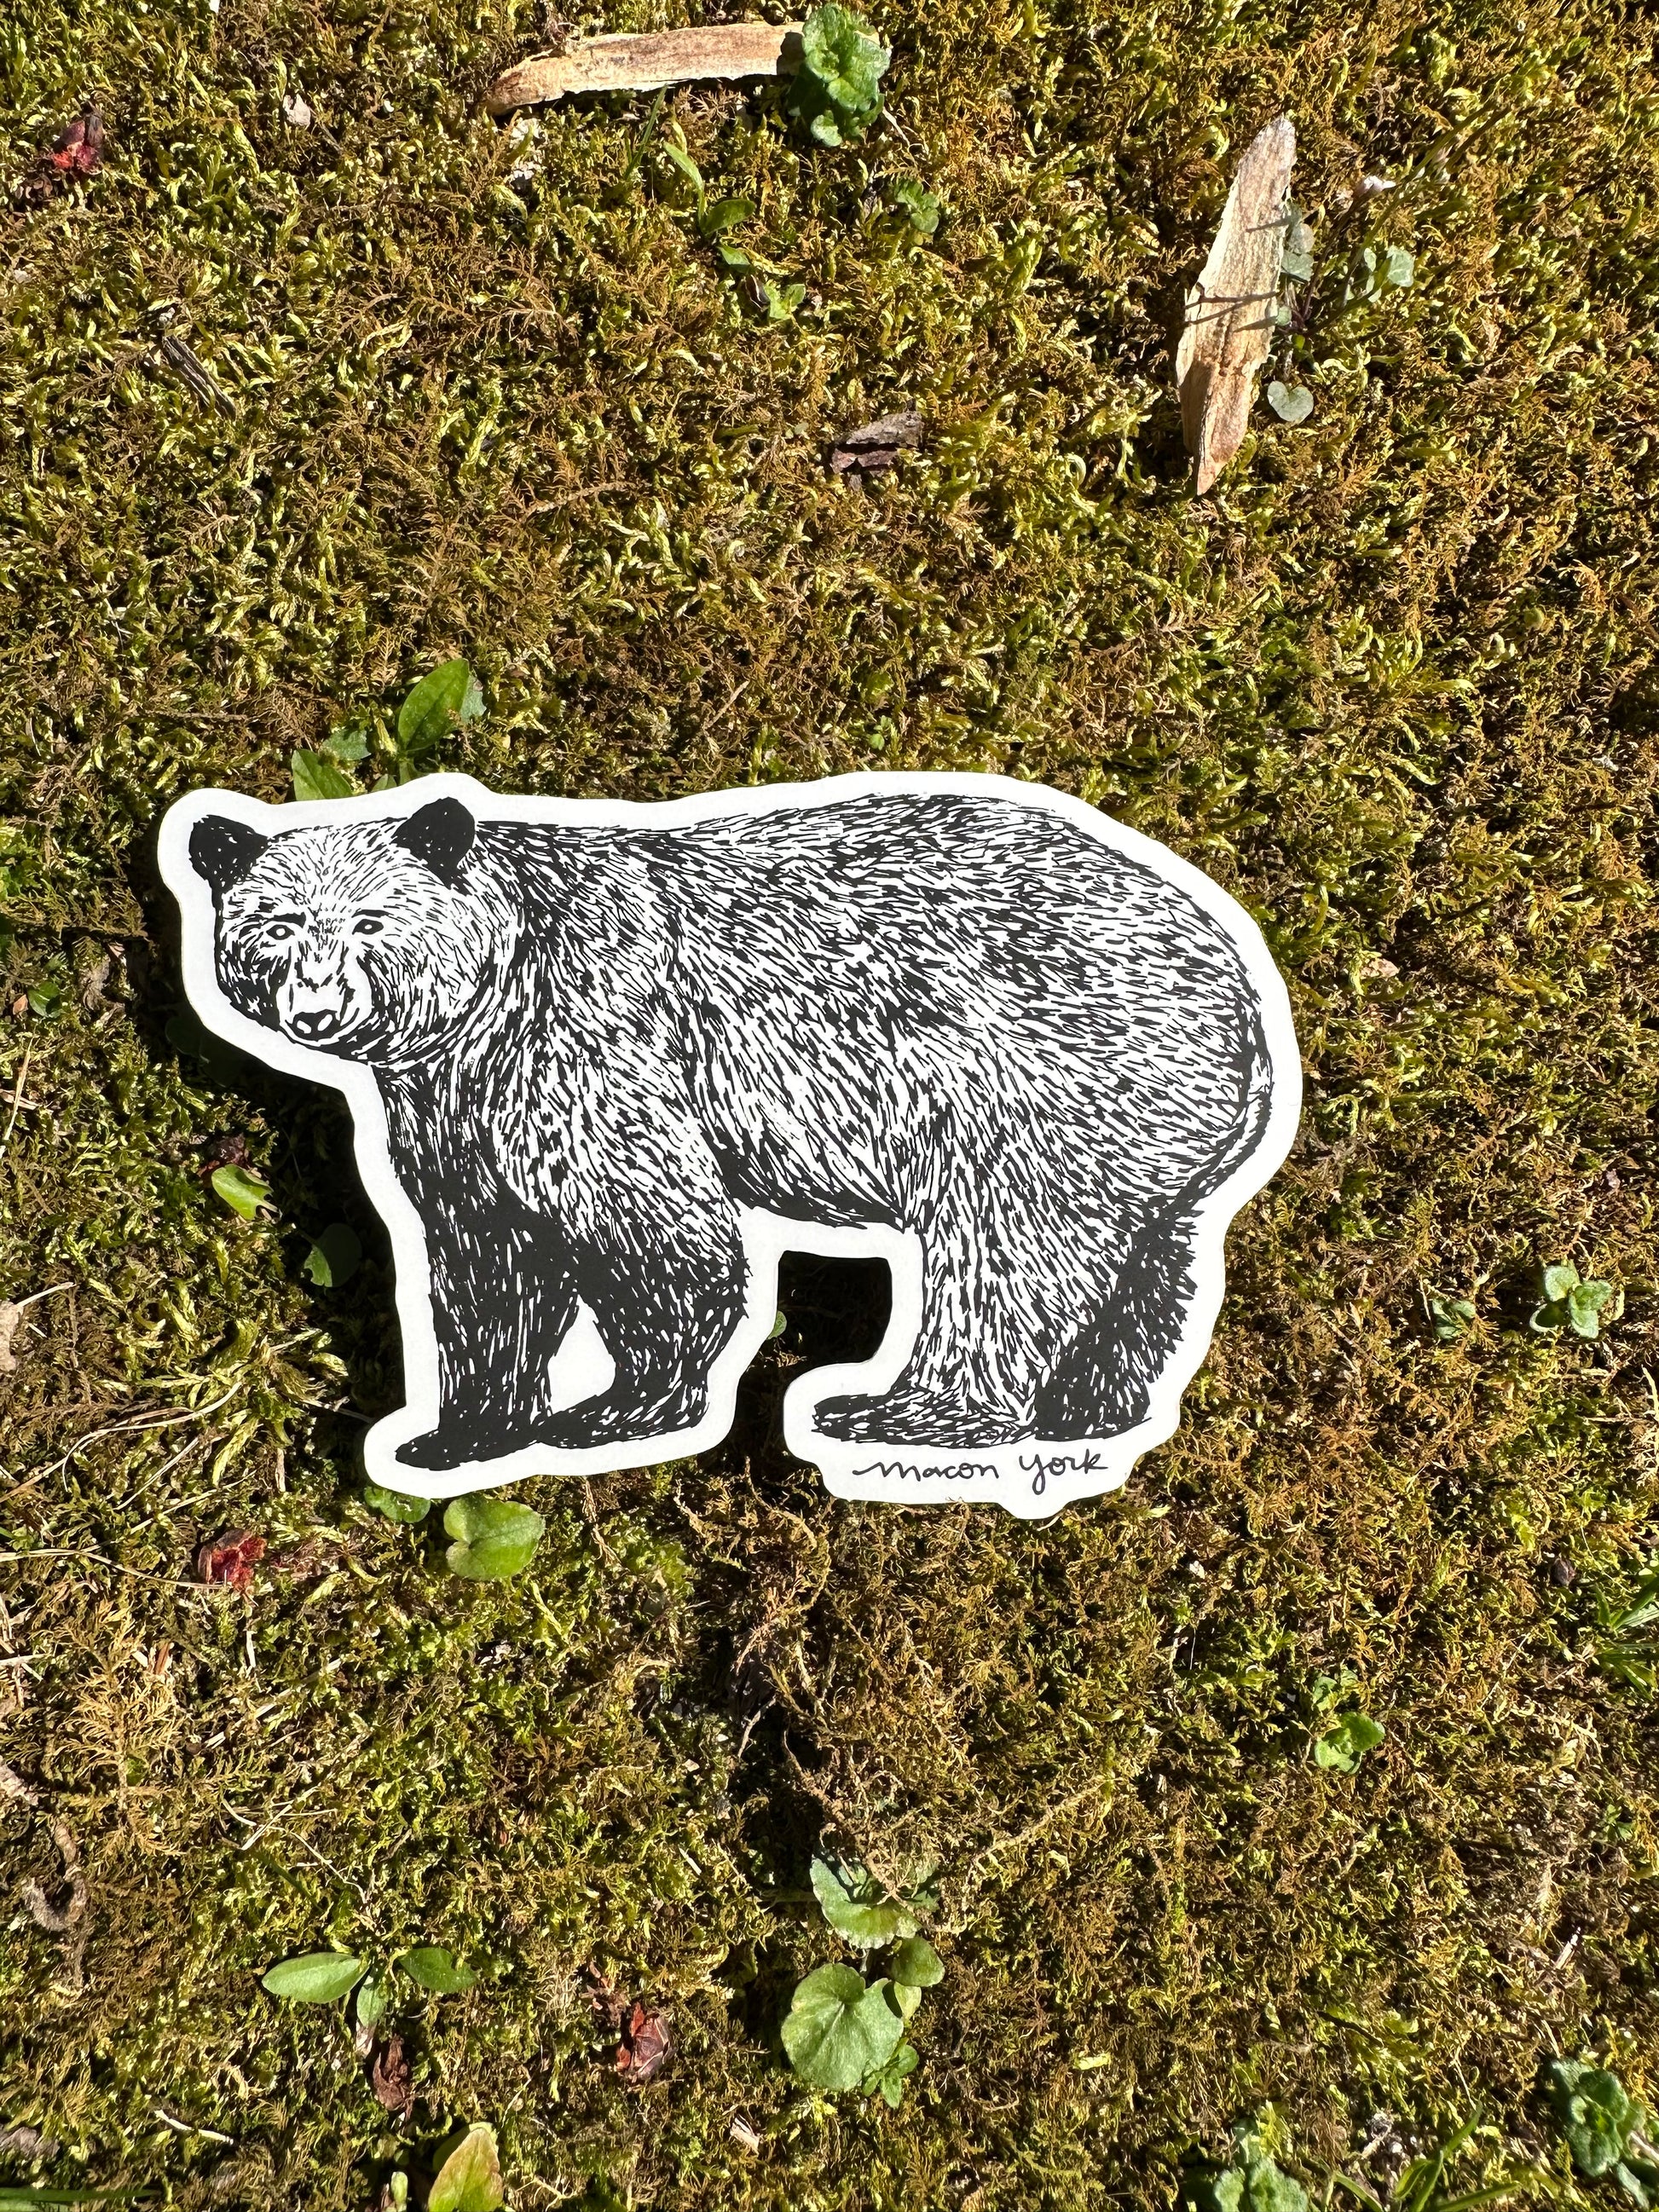 Vinyl sticker featuring a hand-drawn adult Appalachian Black Bear. The bear is looking directly at you with a happy expression.  3.5" x 3" The sticker is shown on a bed of moss. 